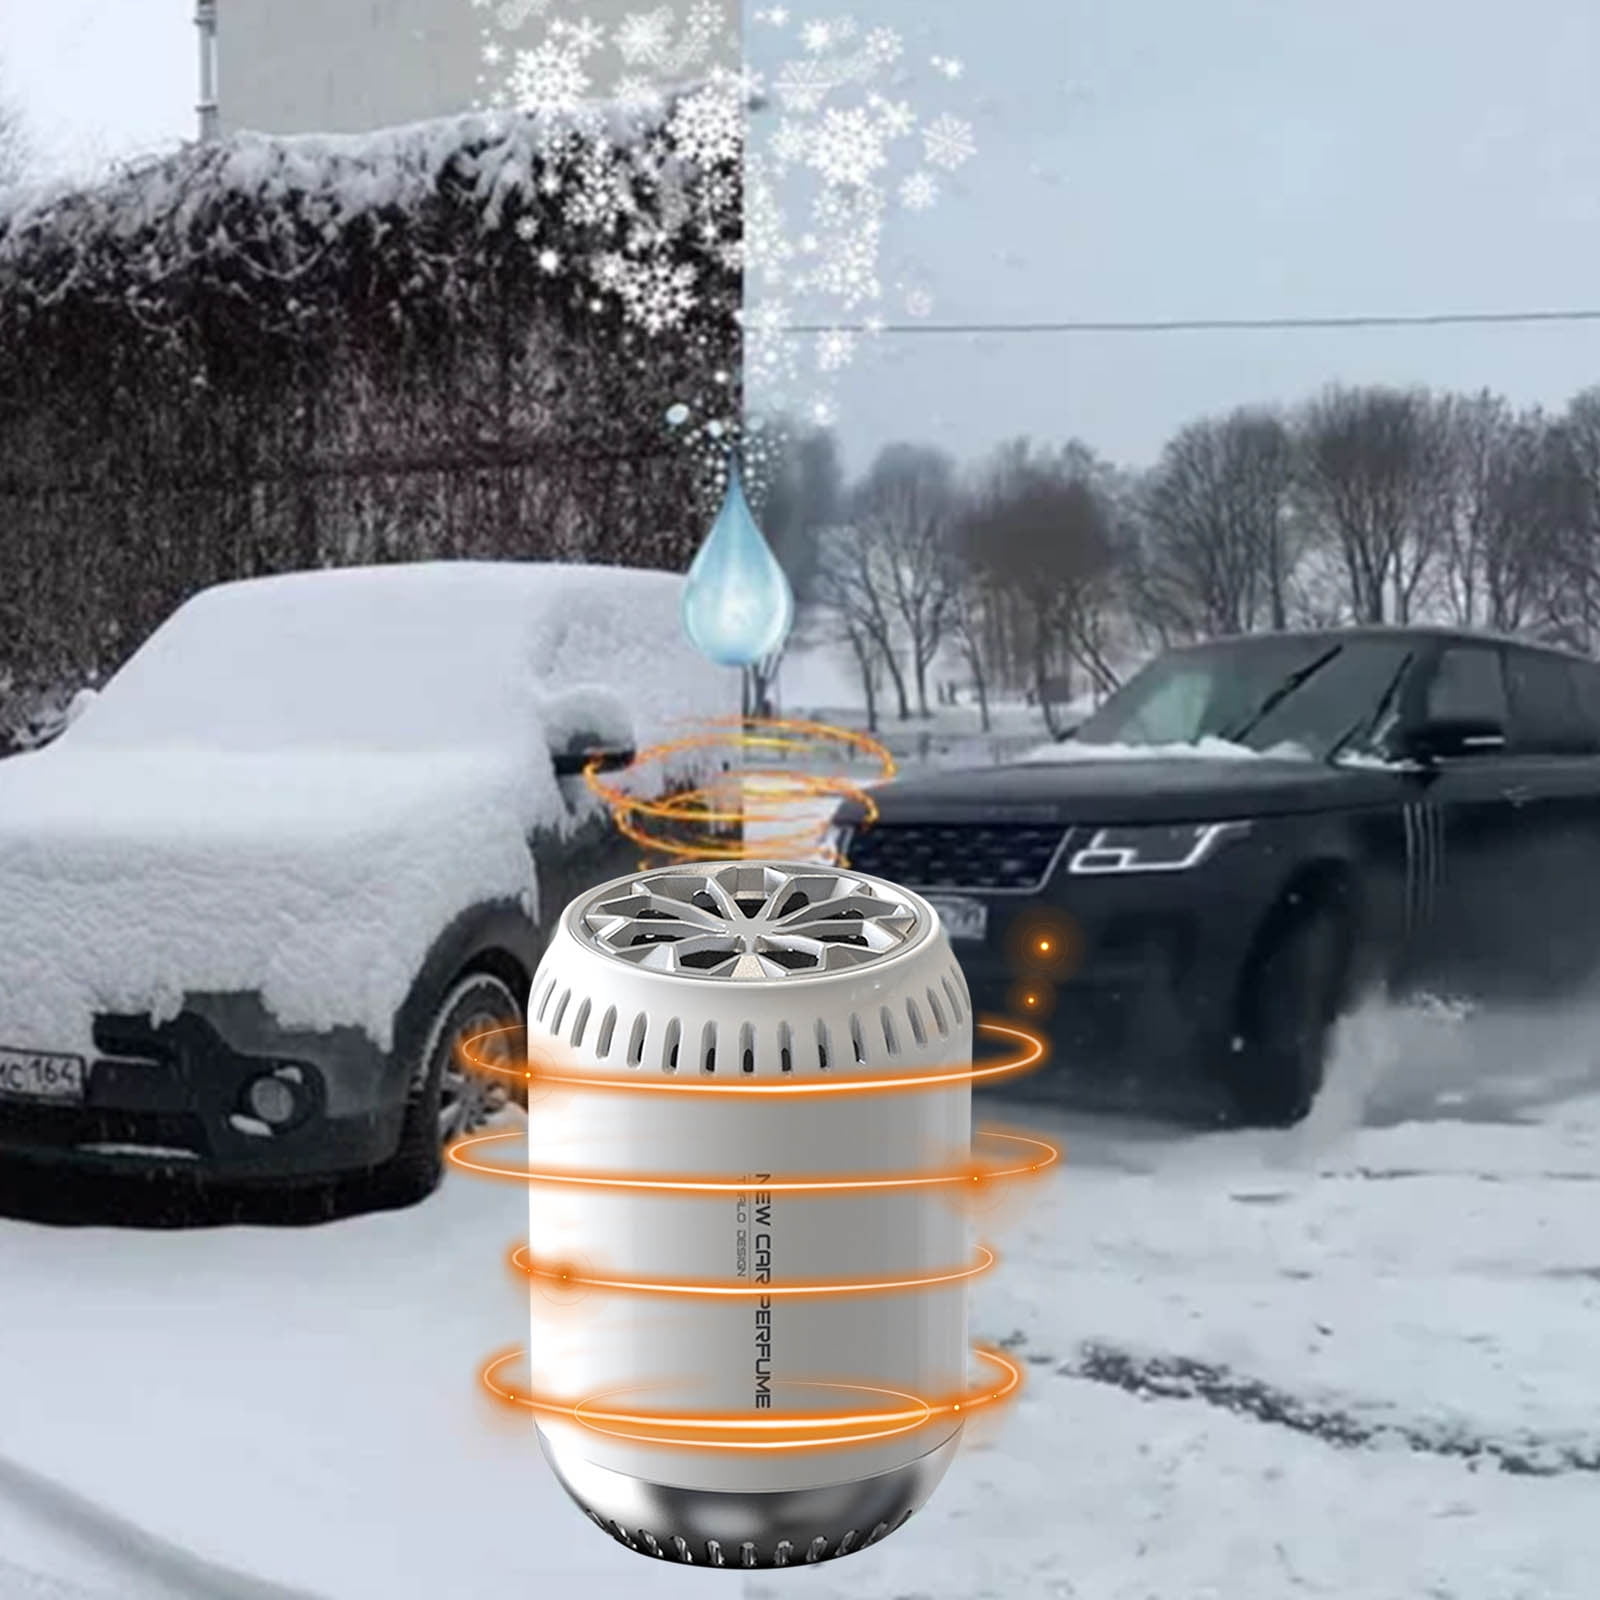 Car Defroster, Electromagnetic Molecular Interference Antifreeze